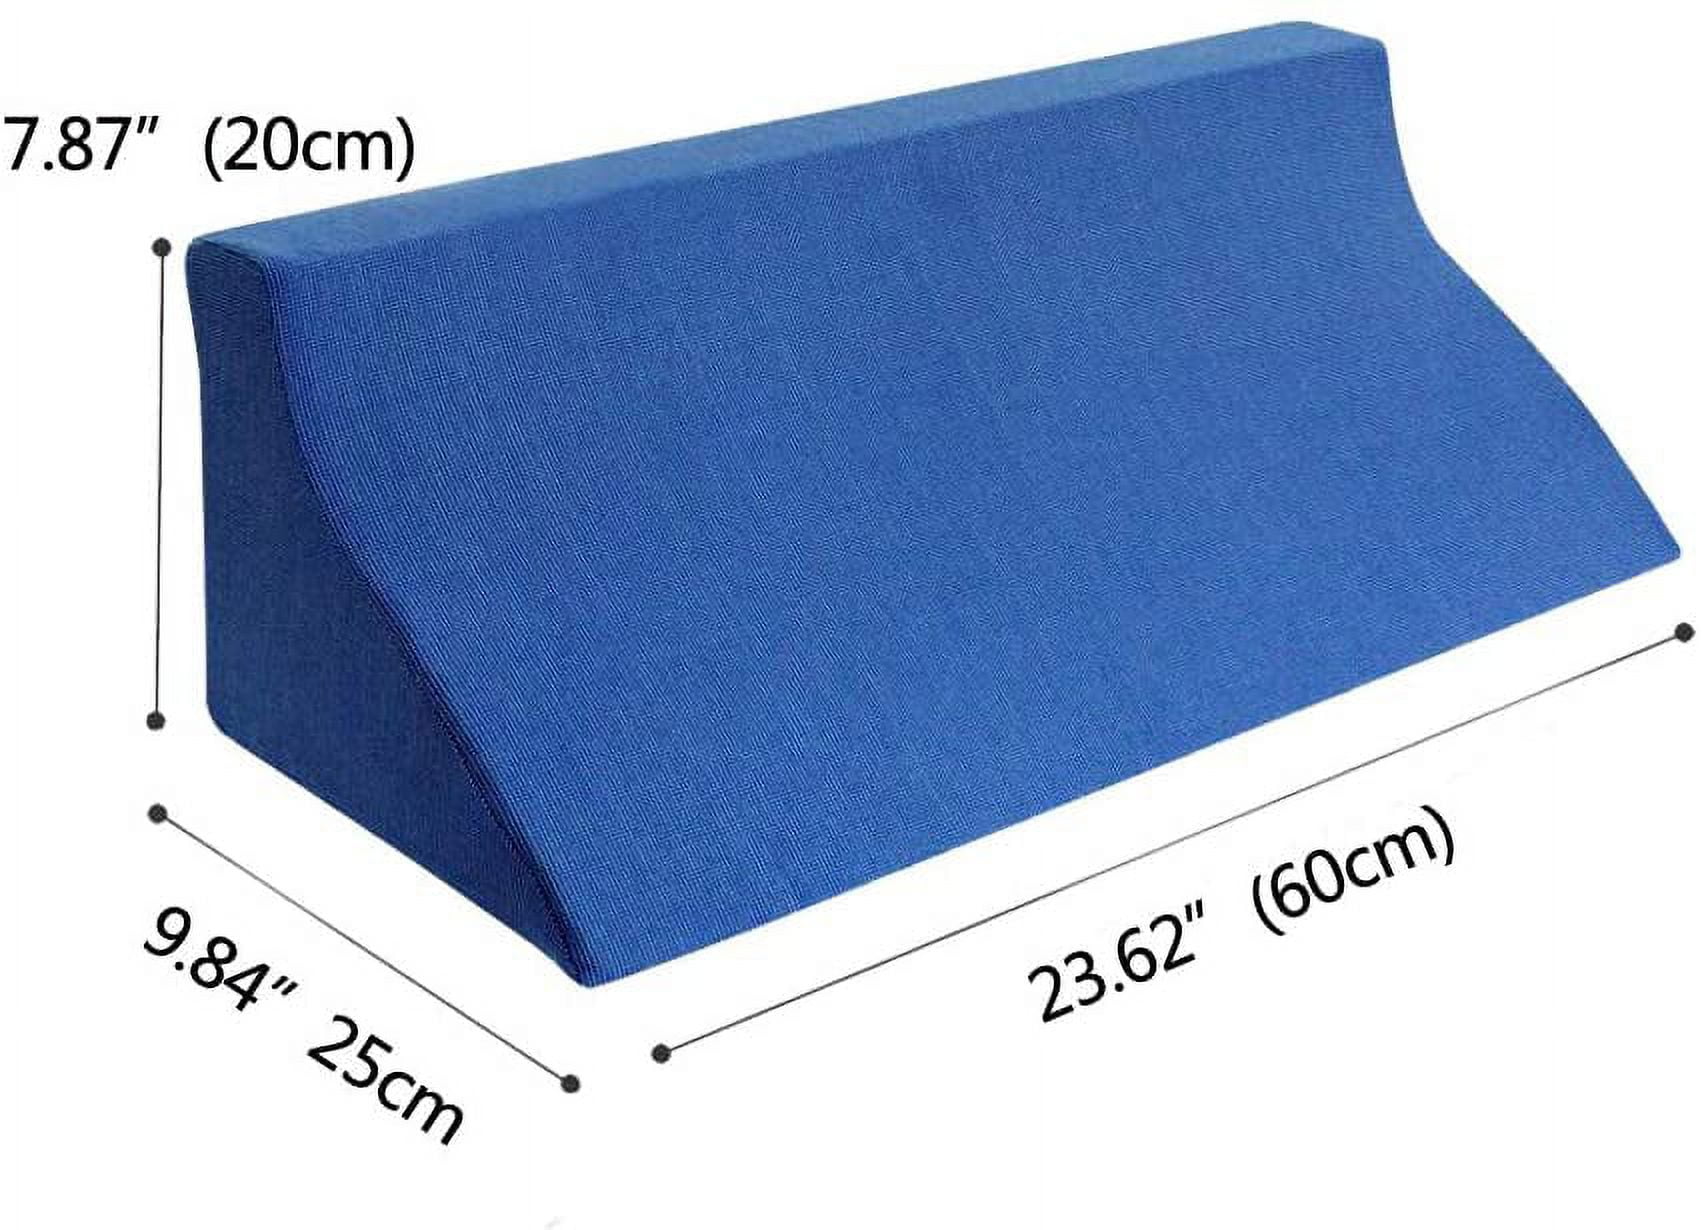 Bedsore Rescue Contoured Elevated Positioning Wedge Support Foam Pillow,  Blue, 1 Piece - Jay C Food Stores